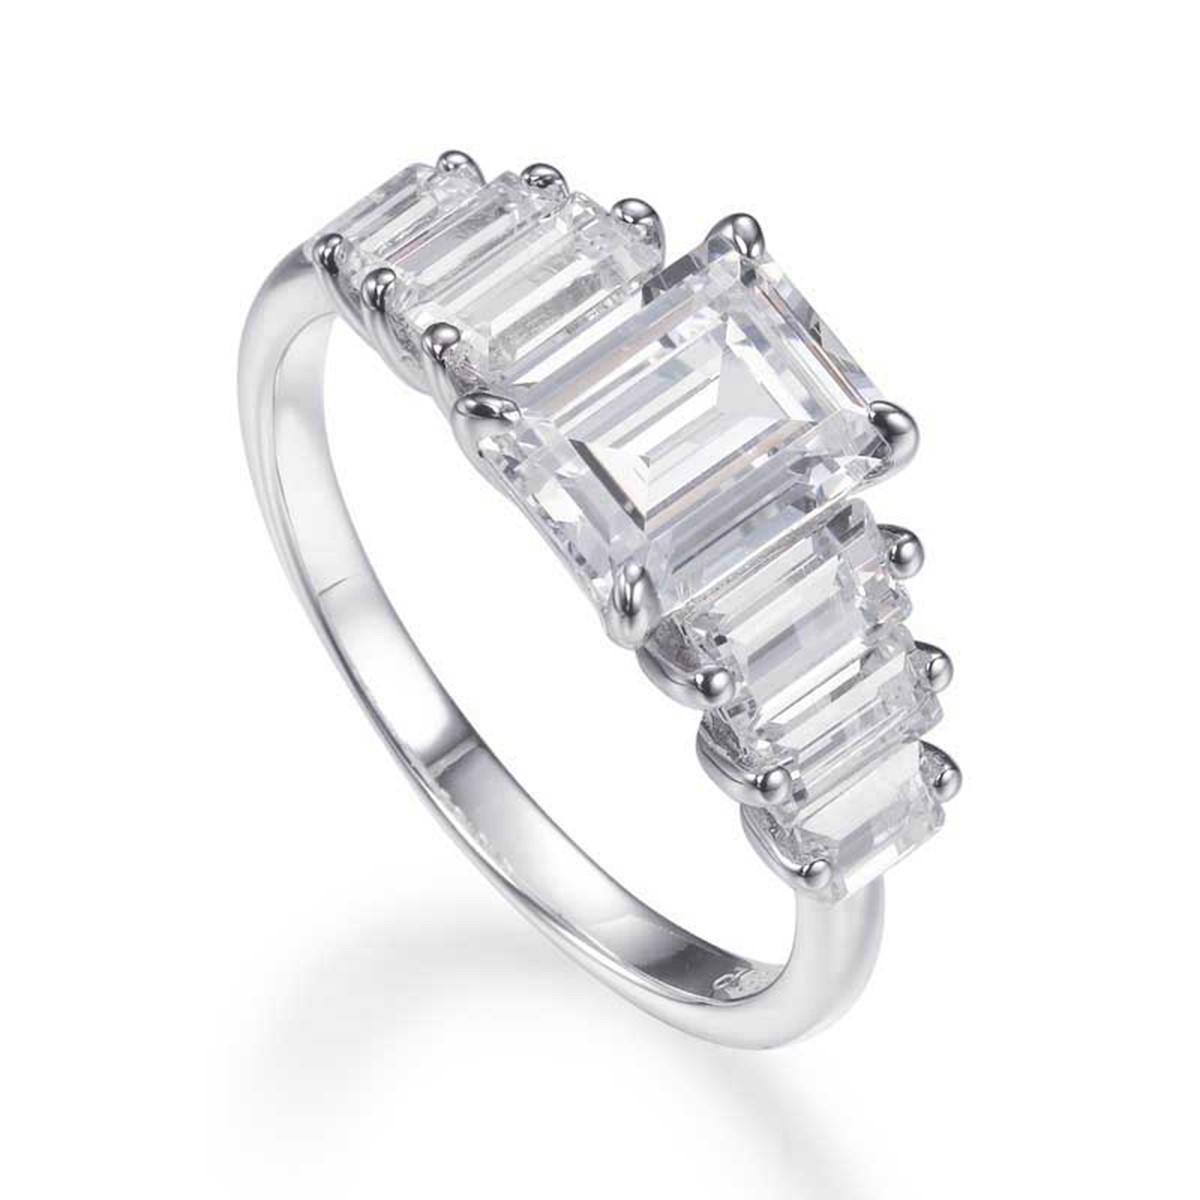 Exceptionally crafted, this impressive engagement ring showcases a large emerald cut centre cubic zirconia measuring 2.53ct, flanked on either side by three beautifully matched tapered baguette cut cubic zirconia, prong-set in a stunning high gloss